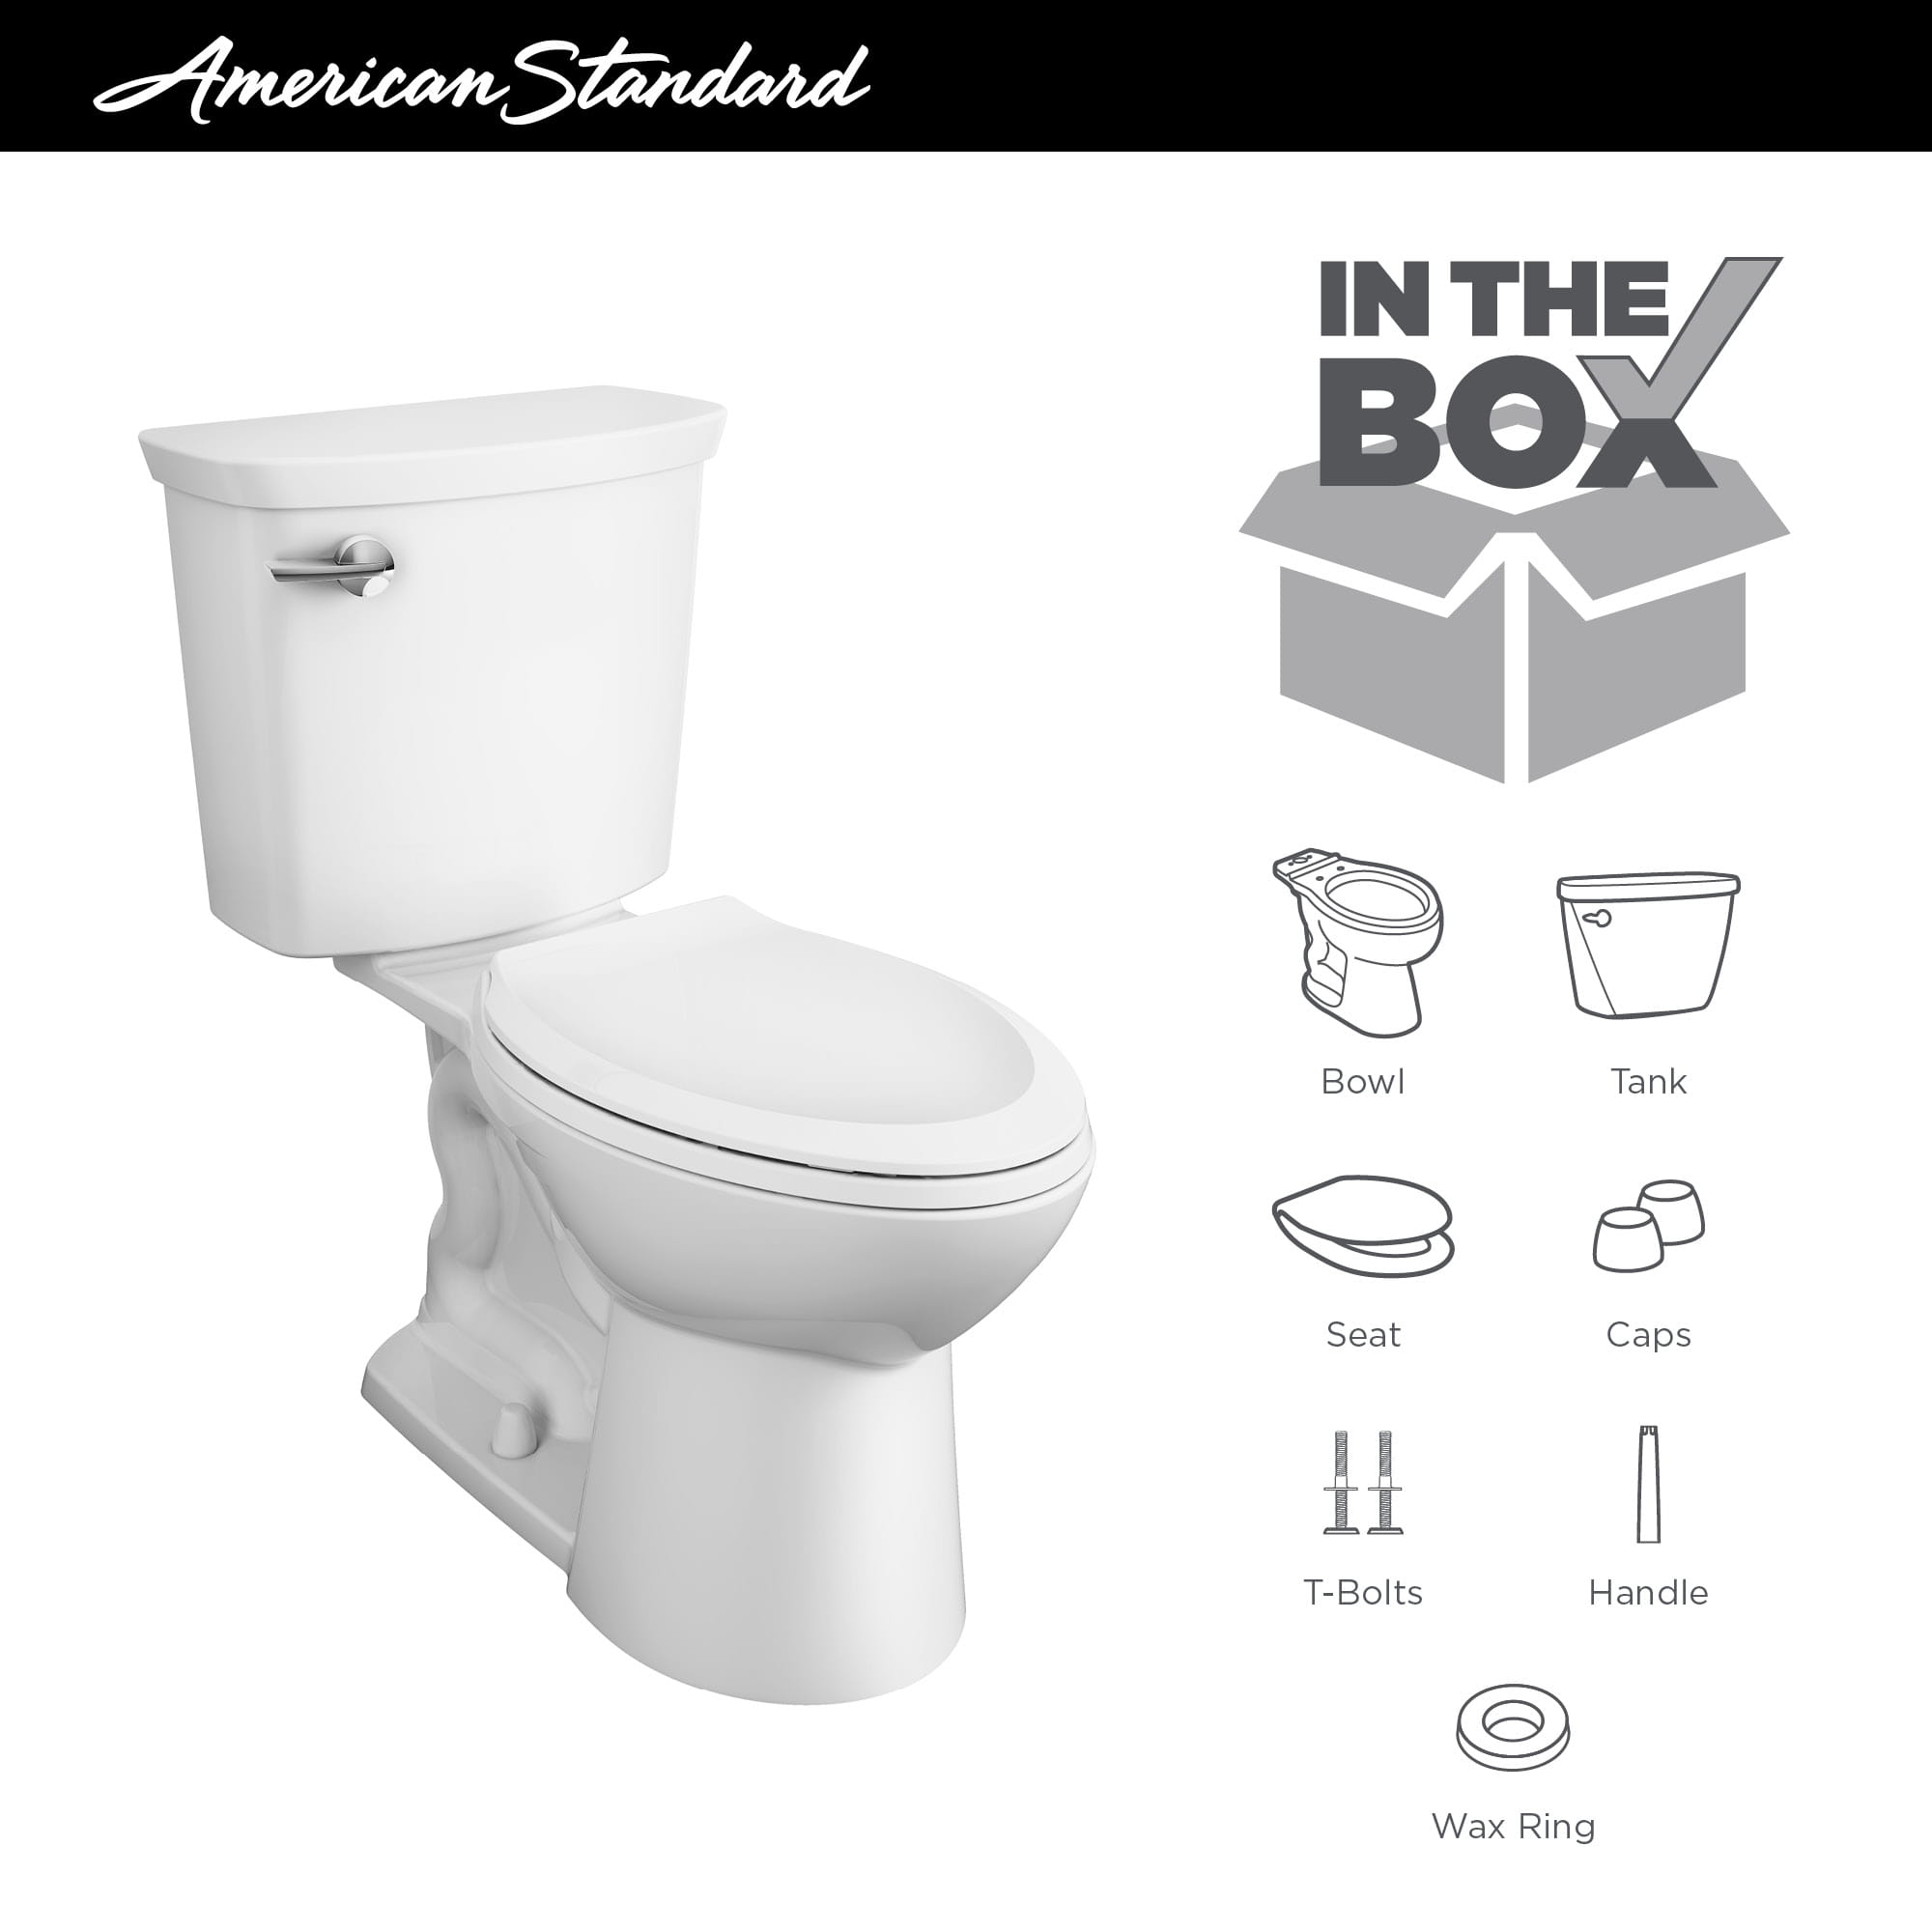 Homestead VorMax Two-Piece 1.28 gpf/4.8 Lpf Chair Height Elongated Toilet with Seat